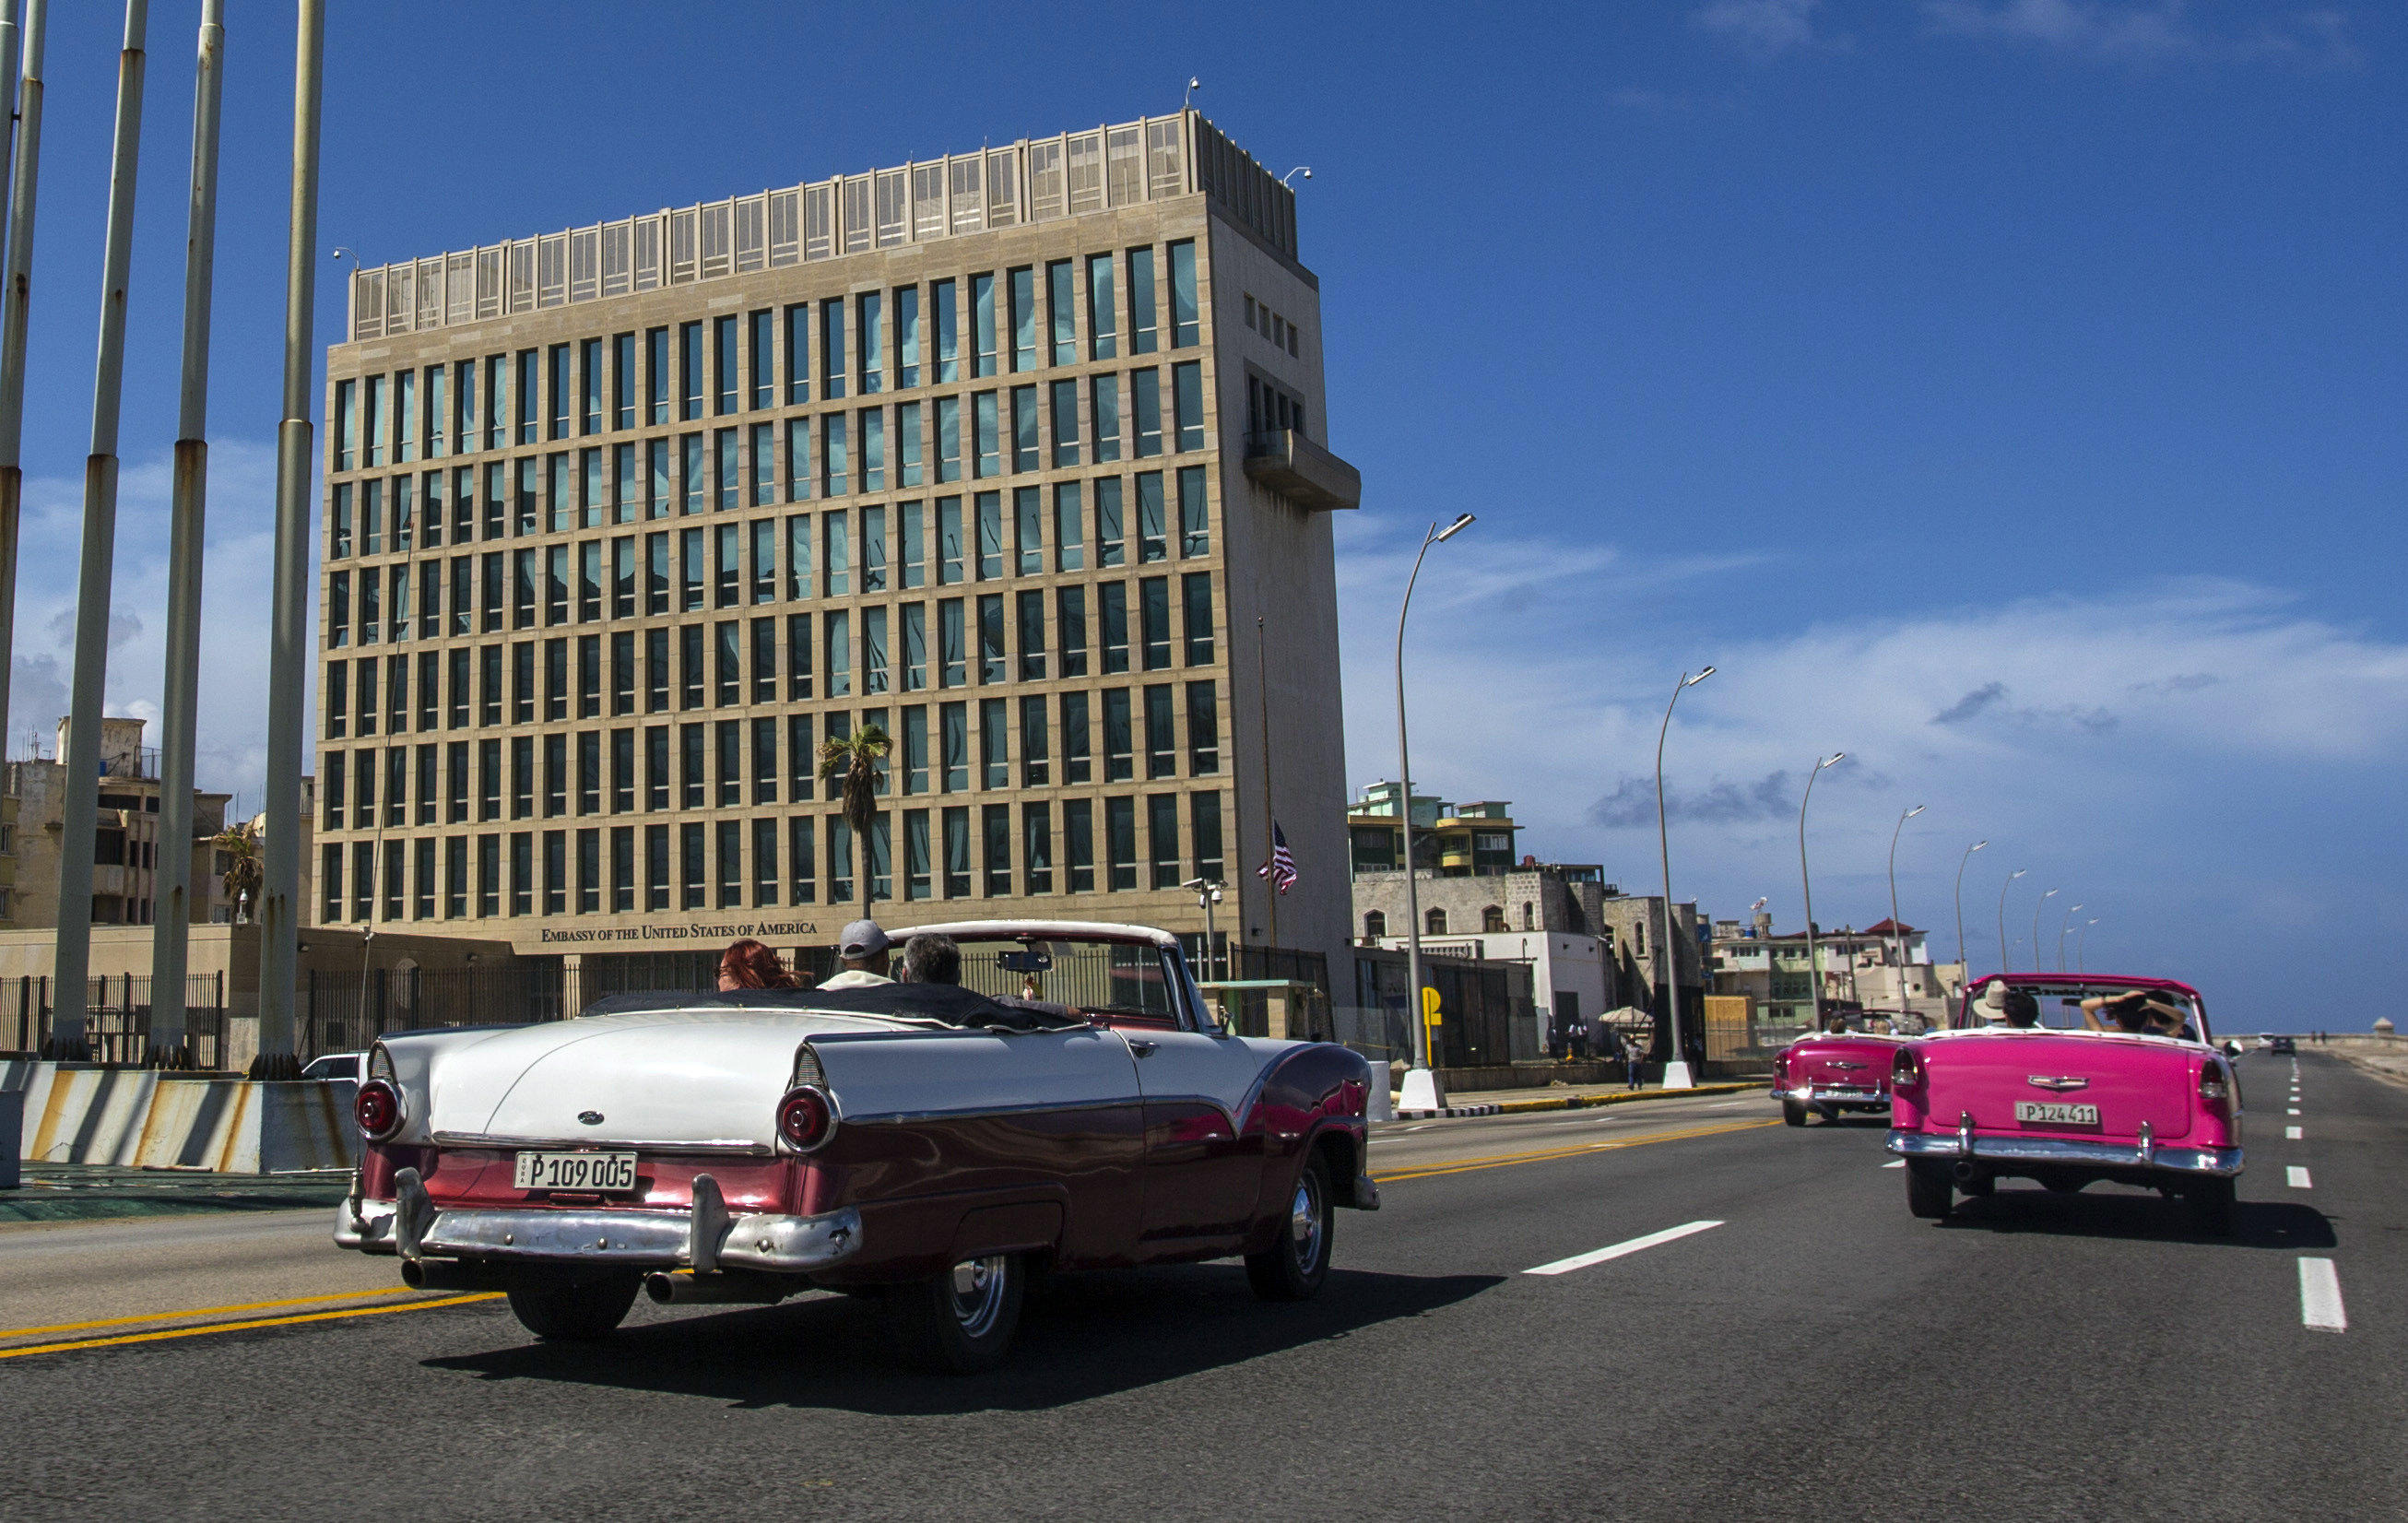 Tourists ride classic convertible cars past the US embassy in Havana, where the first “Havana Syndrome” cases were reported. Photo: AP